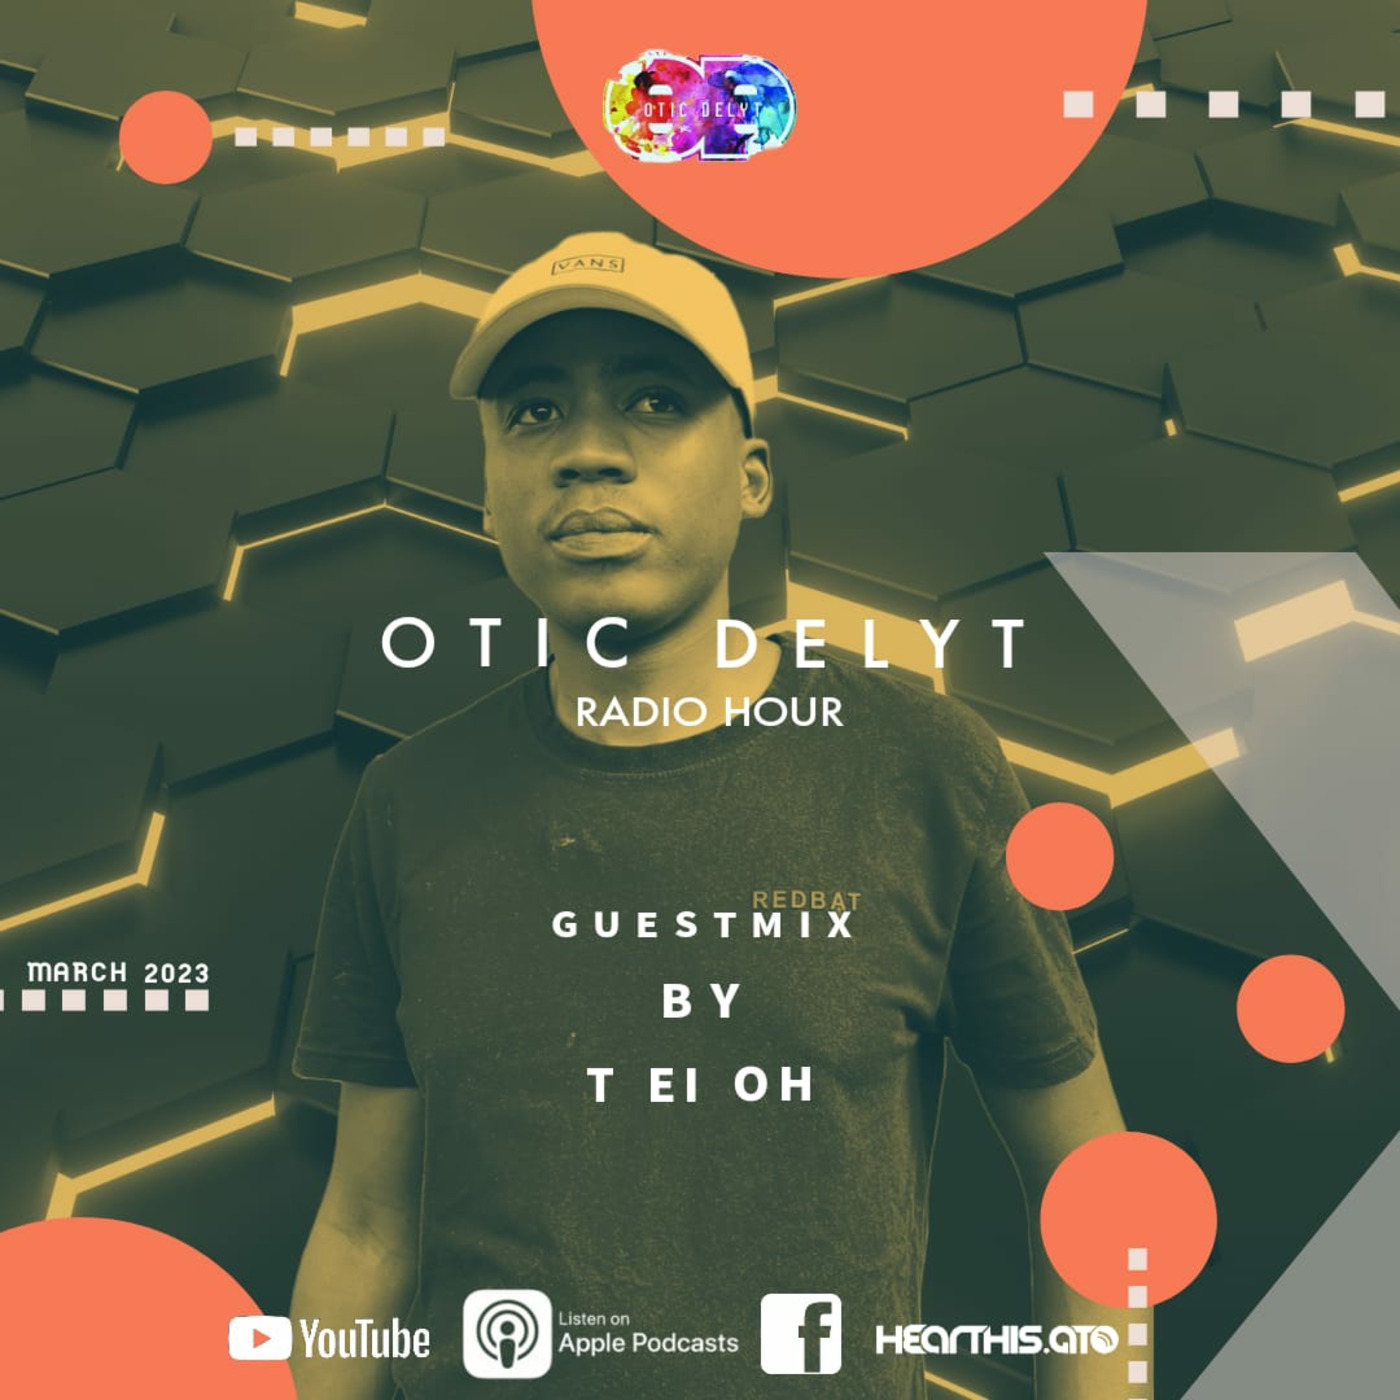 Otic Delyt Radio Hour #068 Guest Mix By T El OH